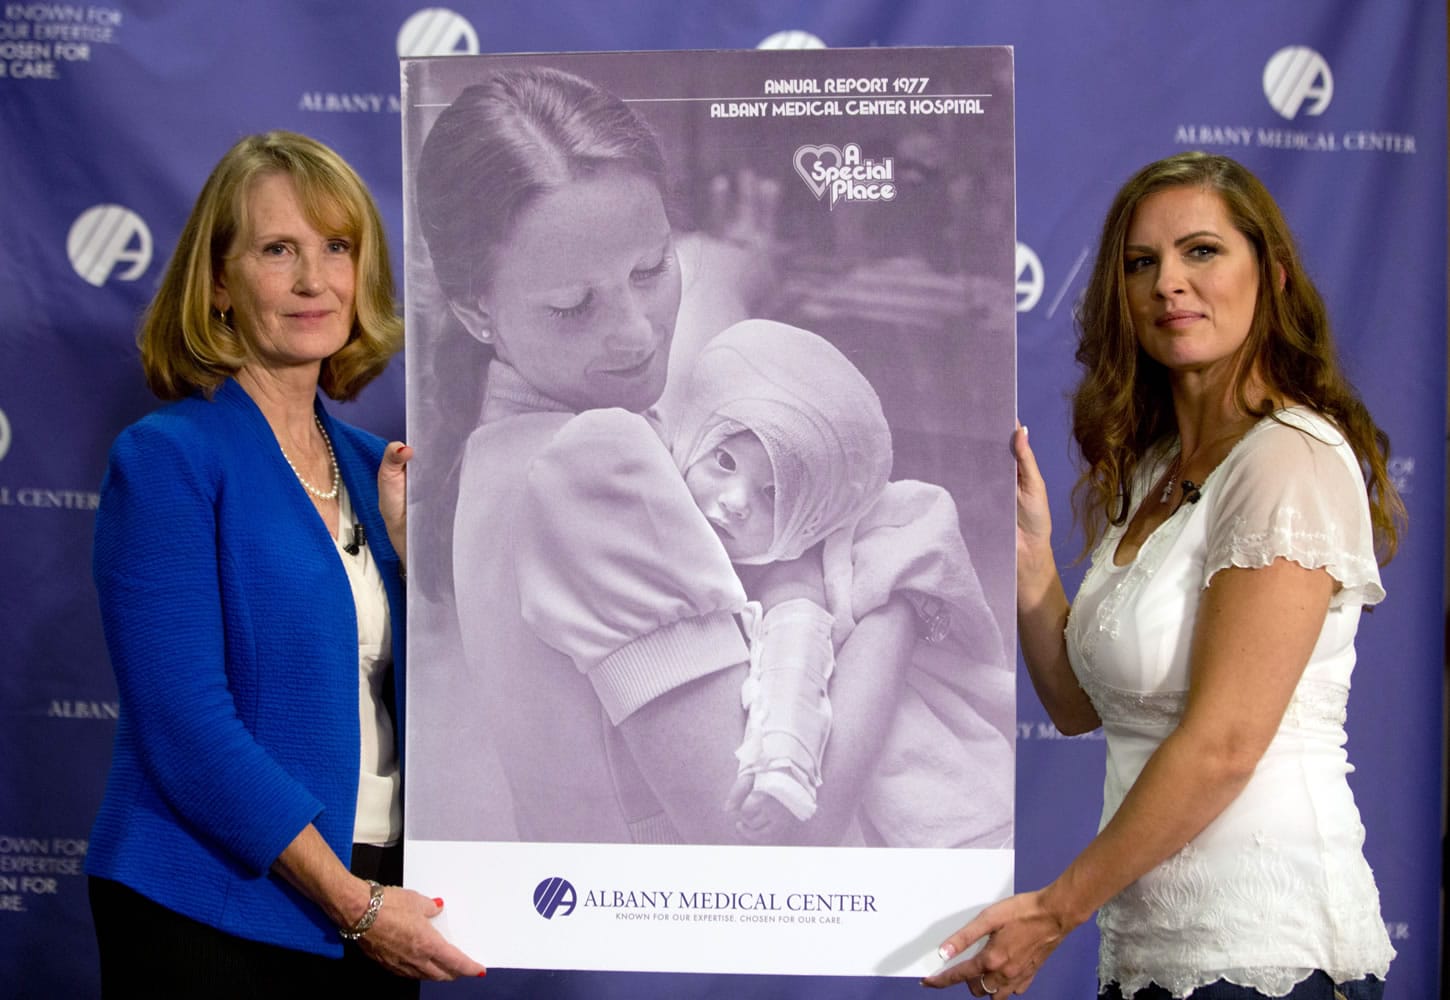 Nurse Susan Berger, left, and Amanda Scarpinati hold a copy of a 1977 Albany Medical Center annual report during a news conference at Albany Medical Center in Albany, N.Y., on Tuesday. Scarpinati, who suffered severe burns as an infant, is finally getting the chance to thank Berger, who cared for her, thanks to 38-year-old photos.